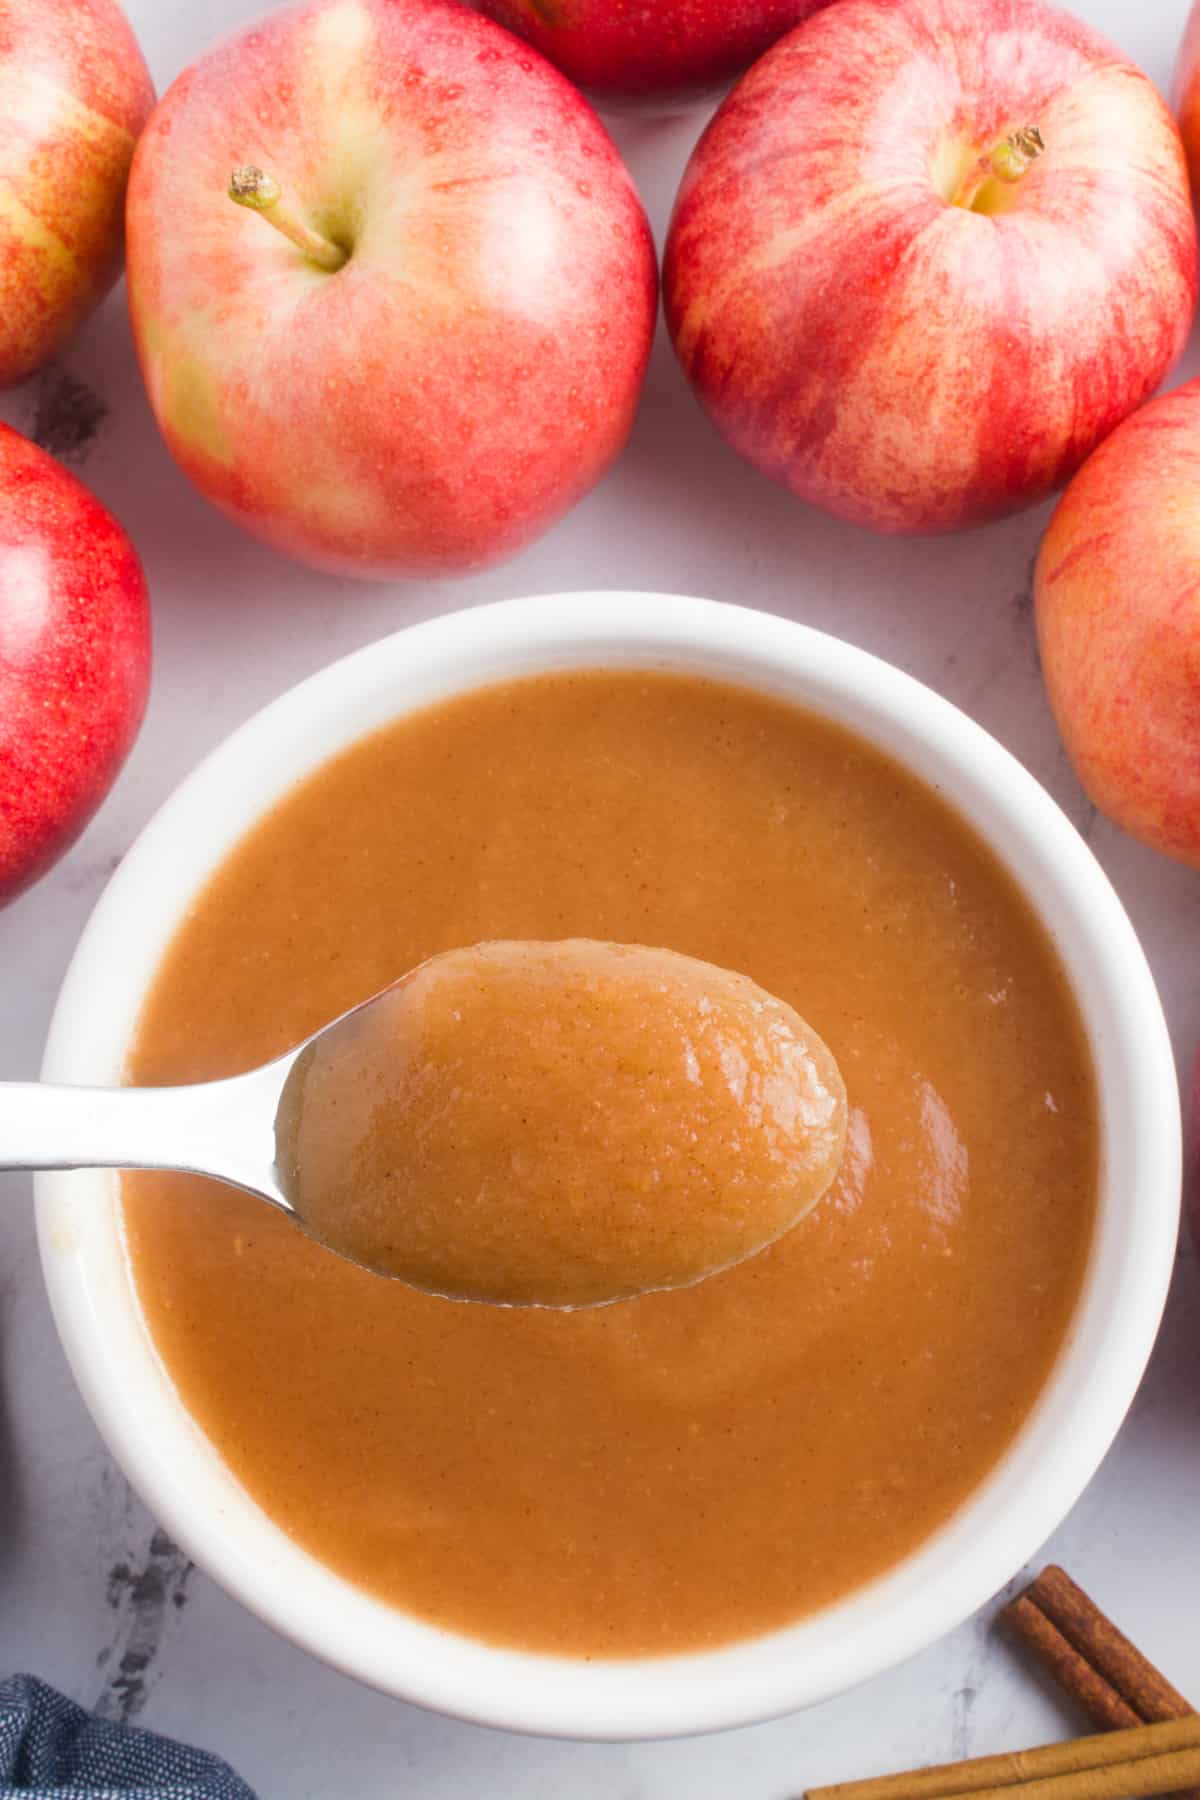 A spoon of applesauce is shown in the foreground, its smooth and velvety texture on full display. Behind the spoon, a bowl of applesauce is visible, suggesting the abundance of this delicious treat. Red apples are positioned around the bowl, adding a touch of color and visual appeal. Two cinnamon sticks are placed nearby, suggesting the aromatic flavor that complements the applesauce.